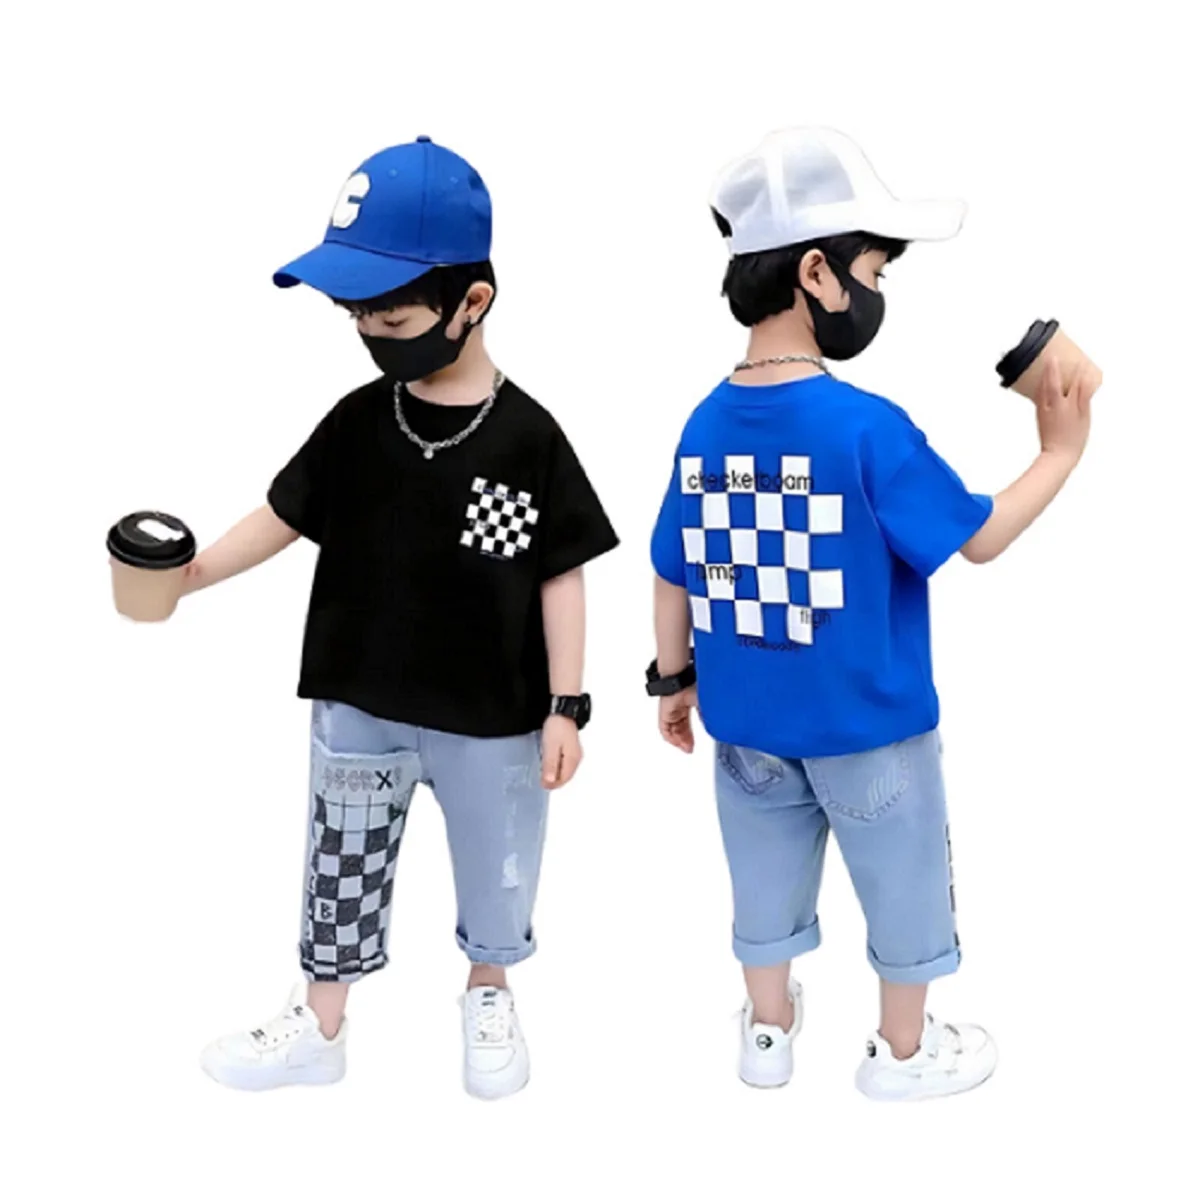 Kid's Modern Day Fashion Casual Outwear Clothing Set Premium Design High Quality Fabric Export Oriented Wholesale Cheap Price